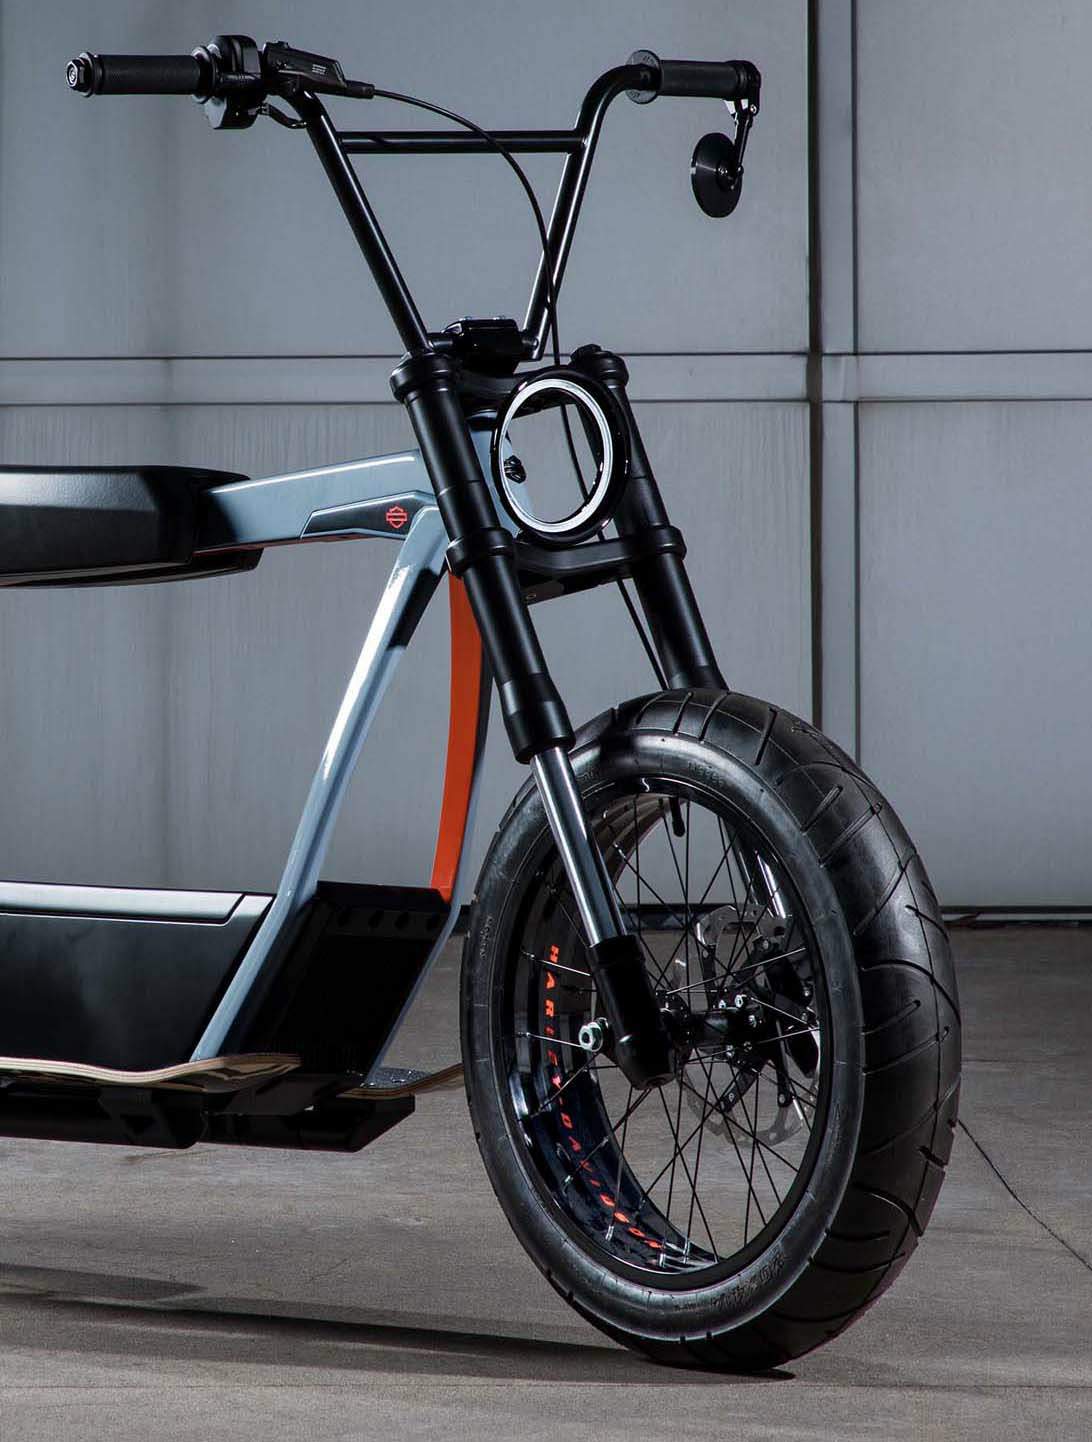 Harley Davidson Electric Scooter Concept For Sale Specifications, Price and Images